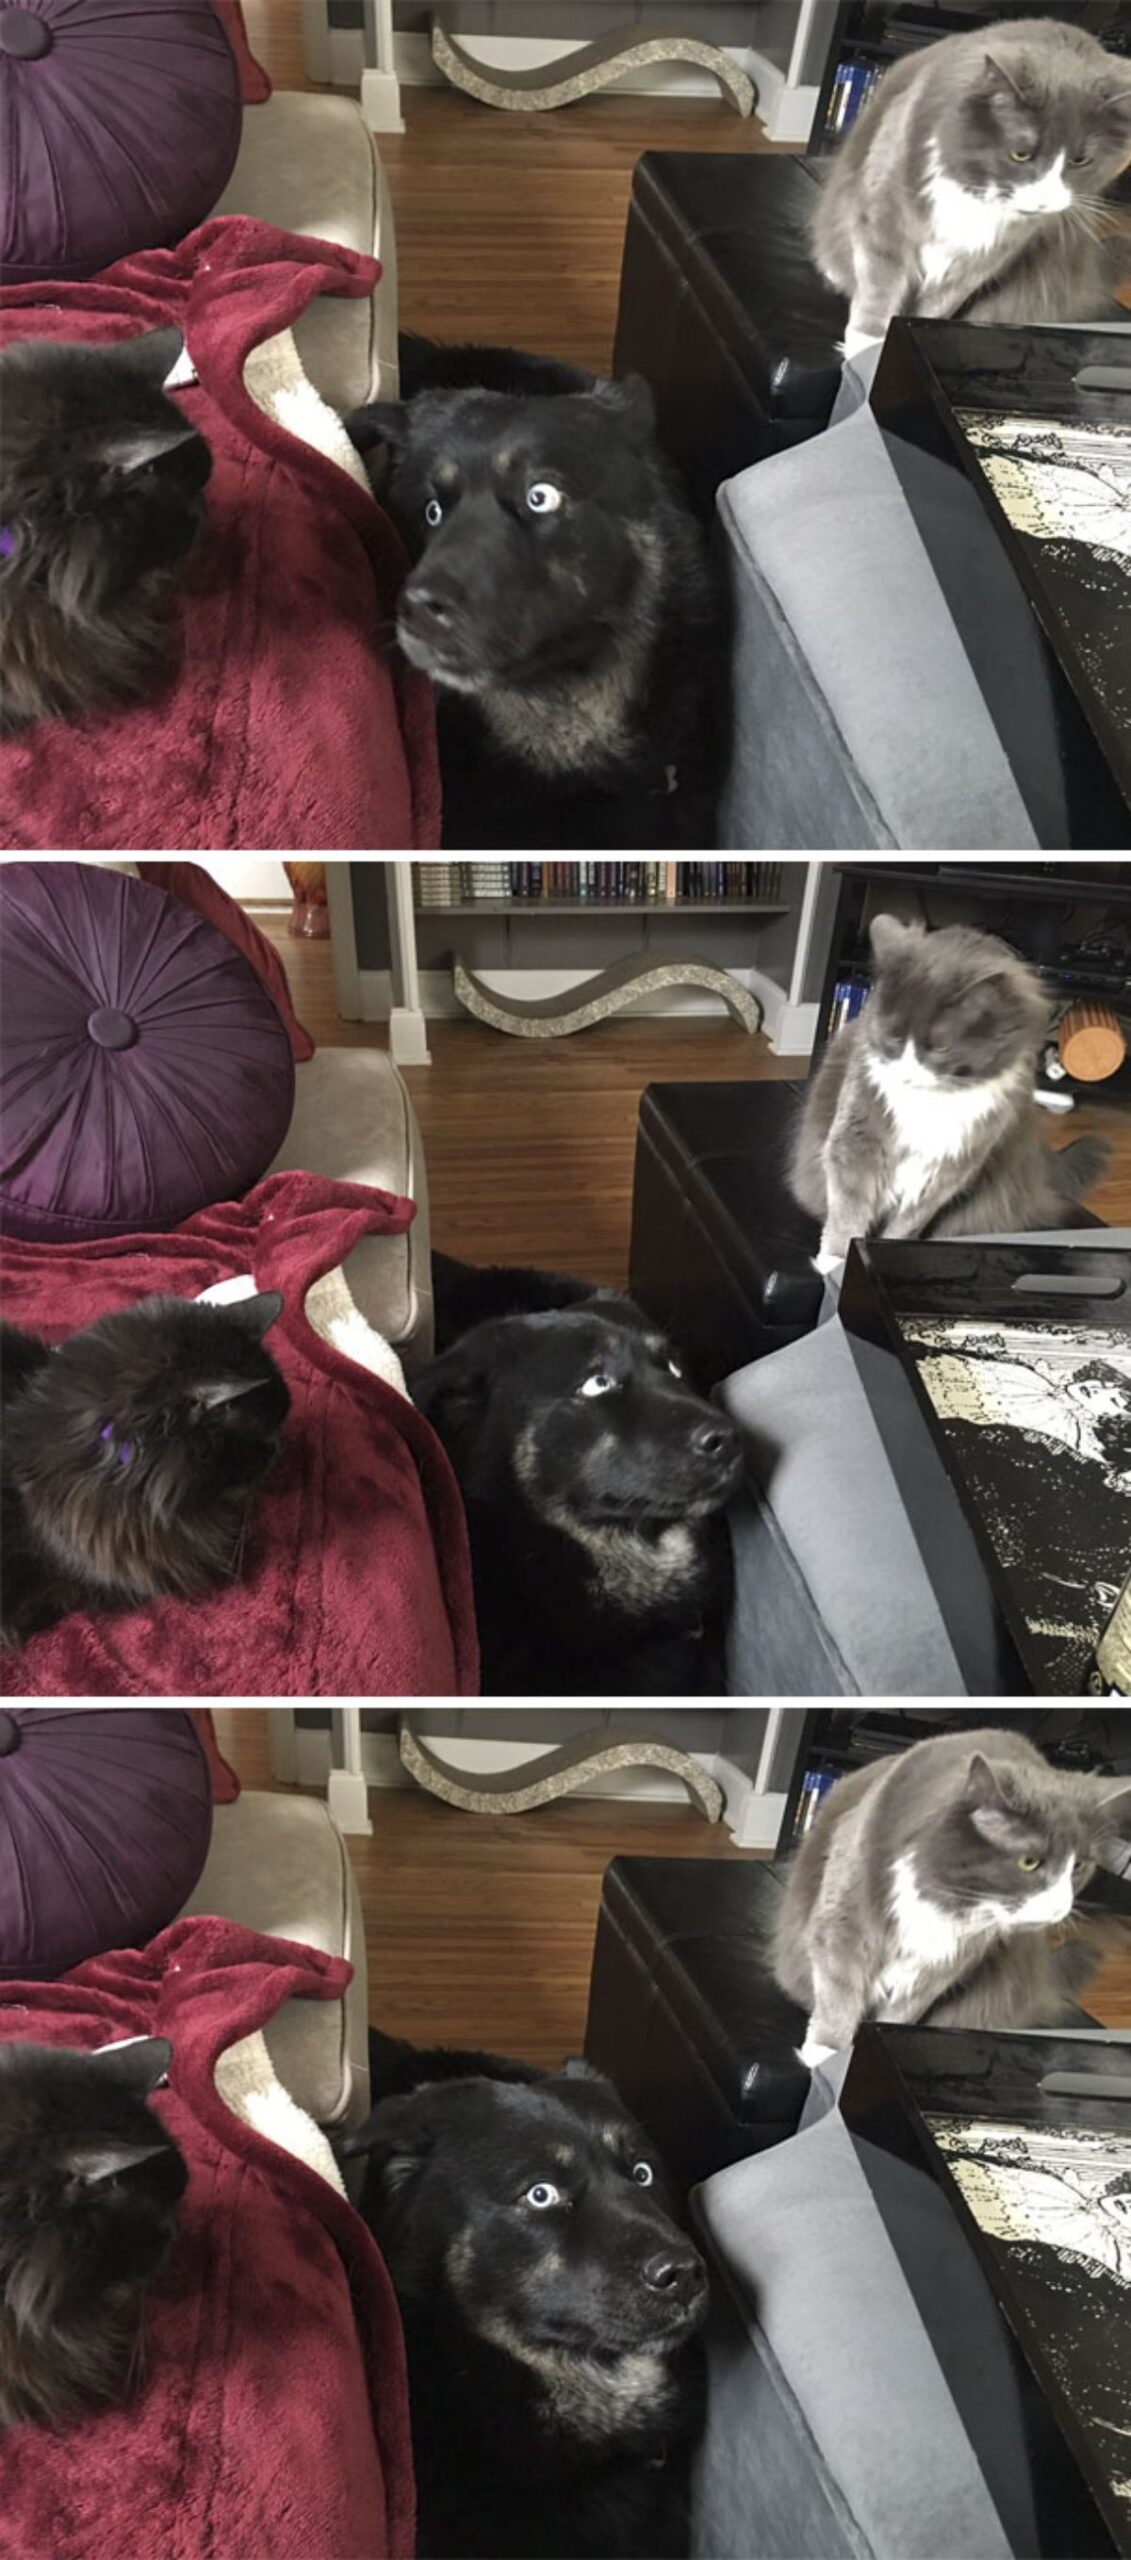 three photos of a black dog looking terrified between a fluffy black cat and a fluffy grey and white cat